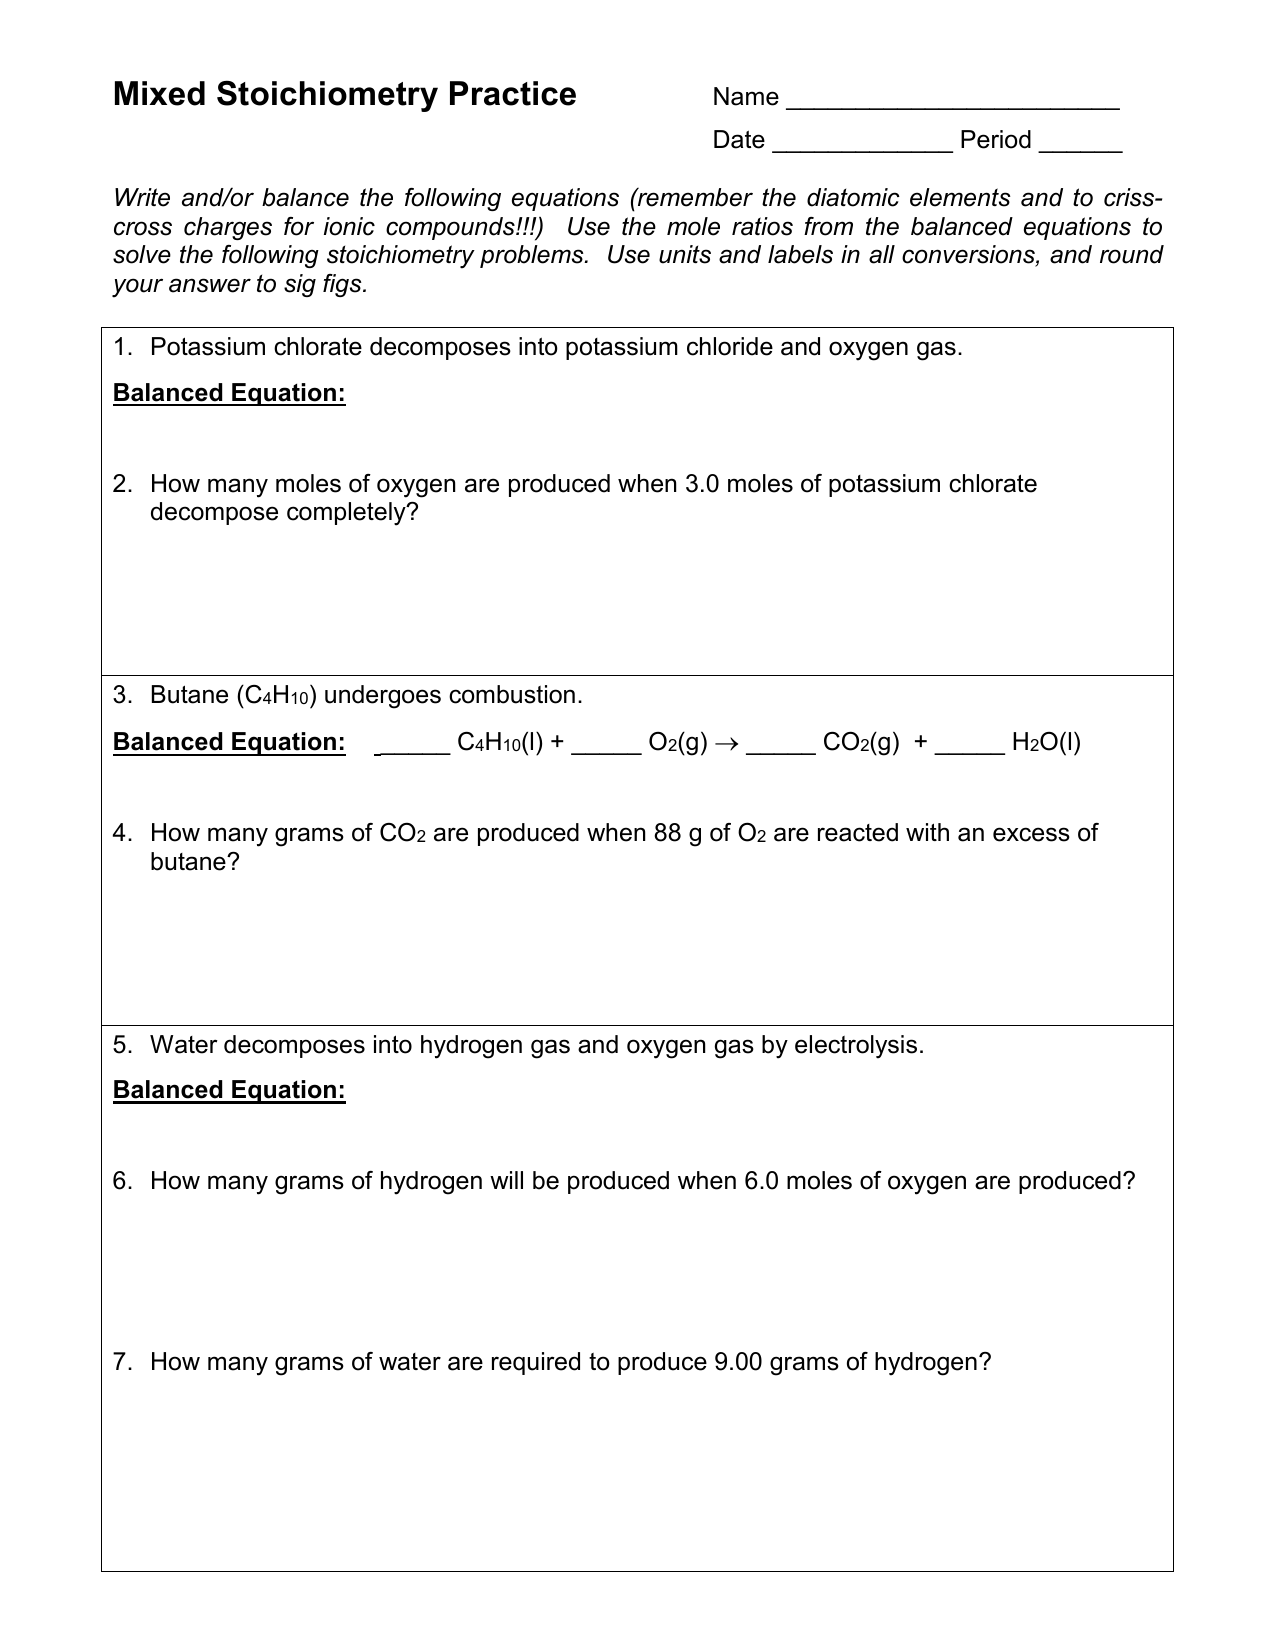 mixed-stoichiometry-worksheet-detailed-answer-key-distance-learning